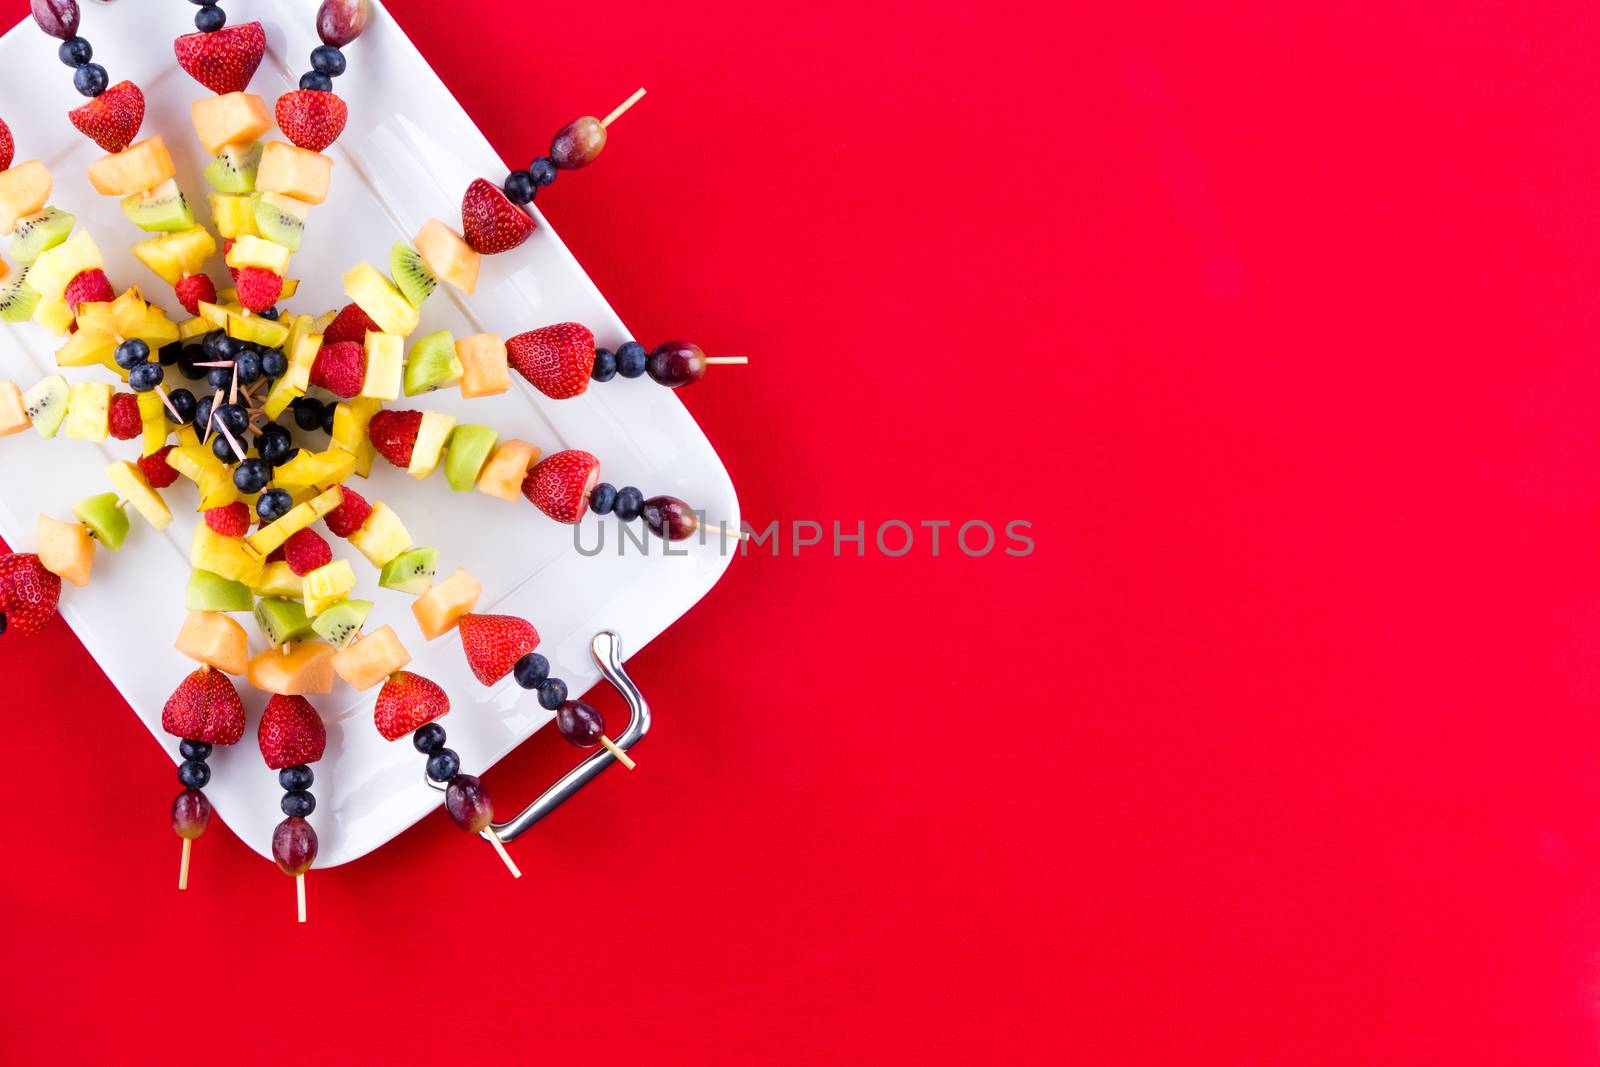 Festive arrangement of fresh fruit kebabs with exotic and tropical summer fruit arranged on a tray over a red party background with copy space, overhead view